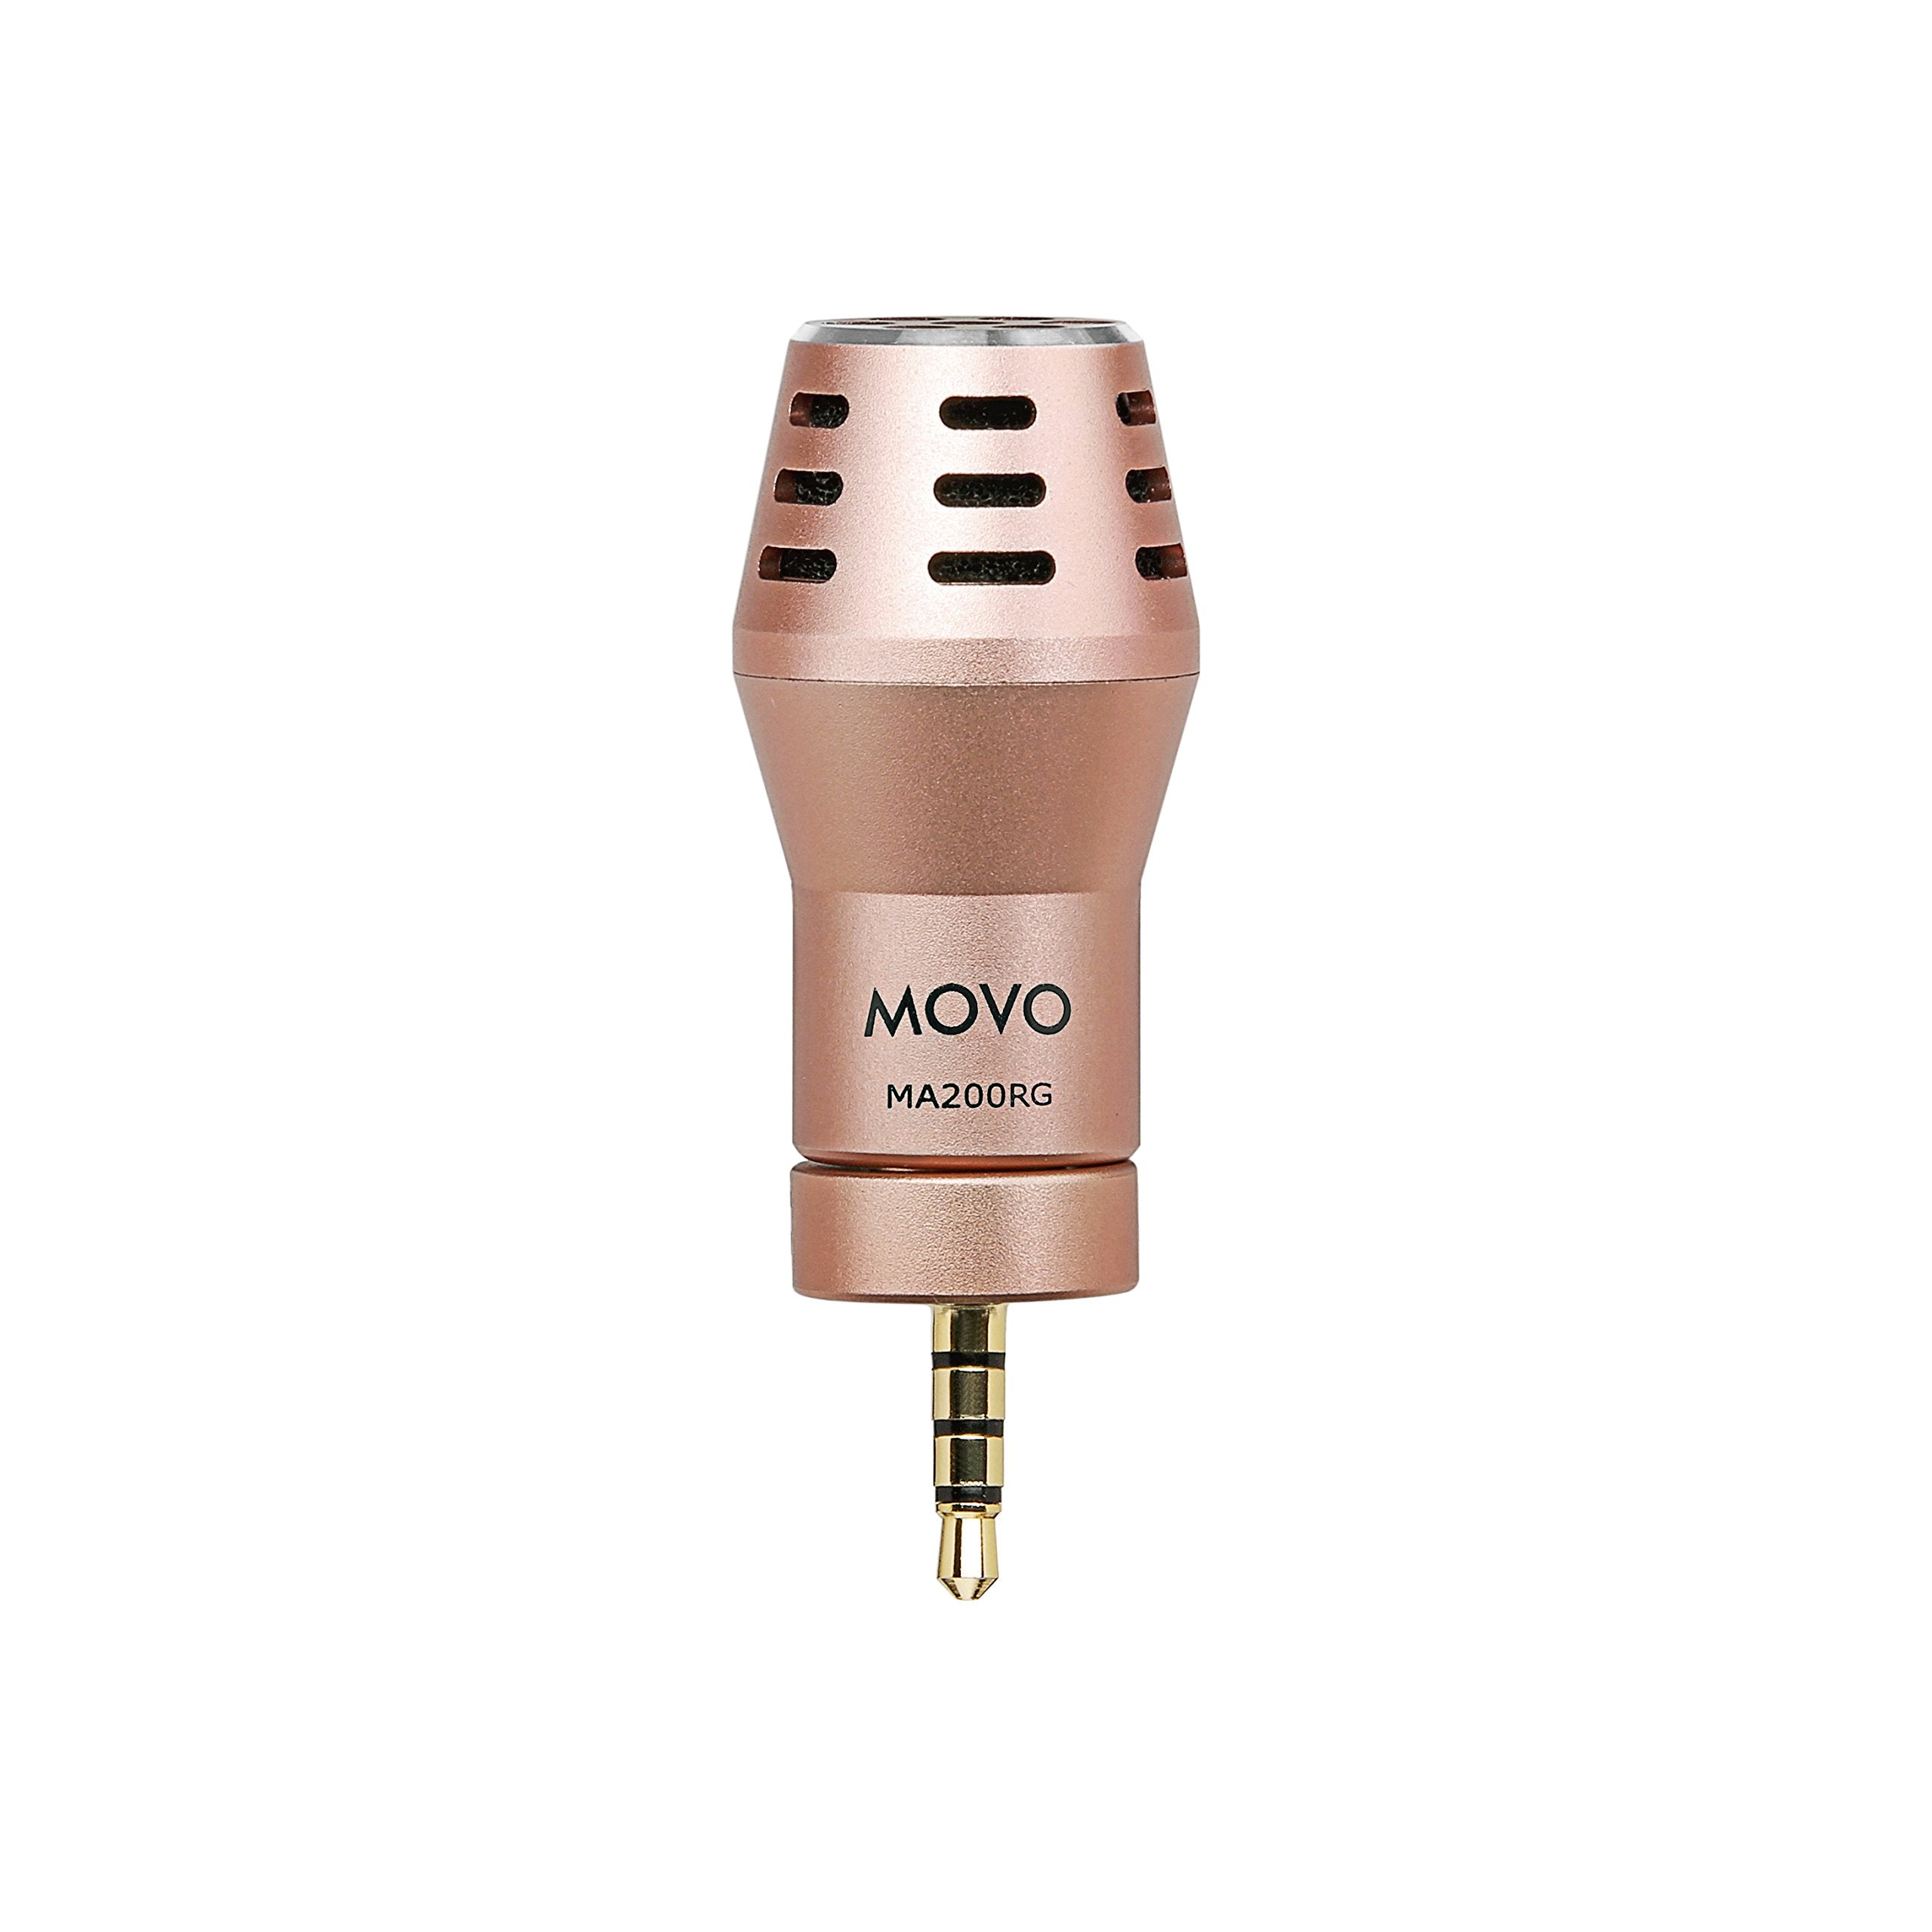 Movo MA200 Omni-Directional Calibrated TRRS Condenser Microphone for Apple iPhone, iPod Touch, iPad (Rose Gold)  - Like New